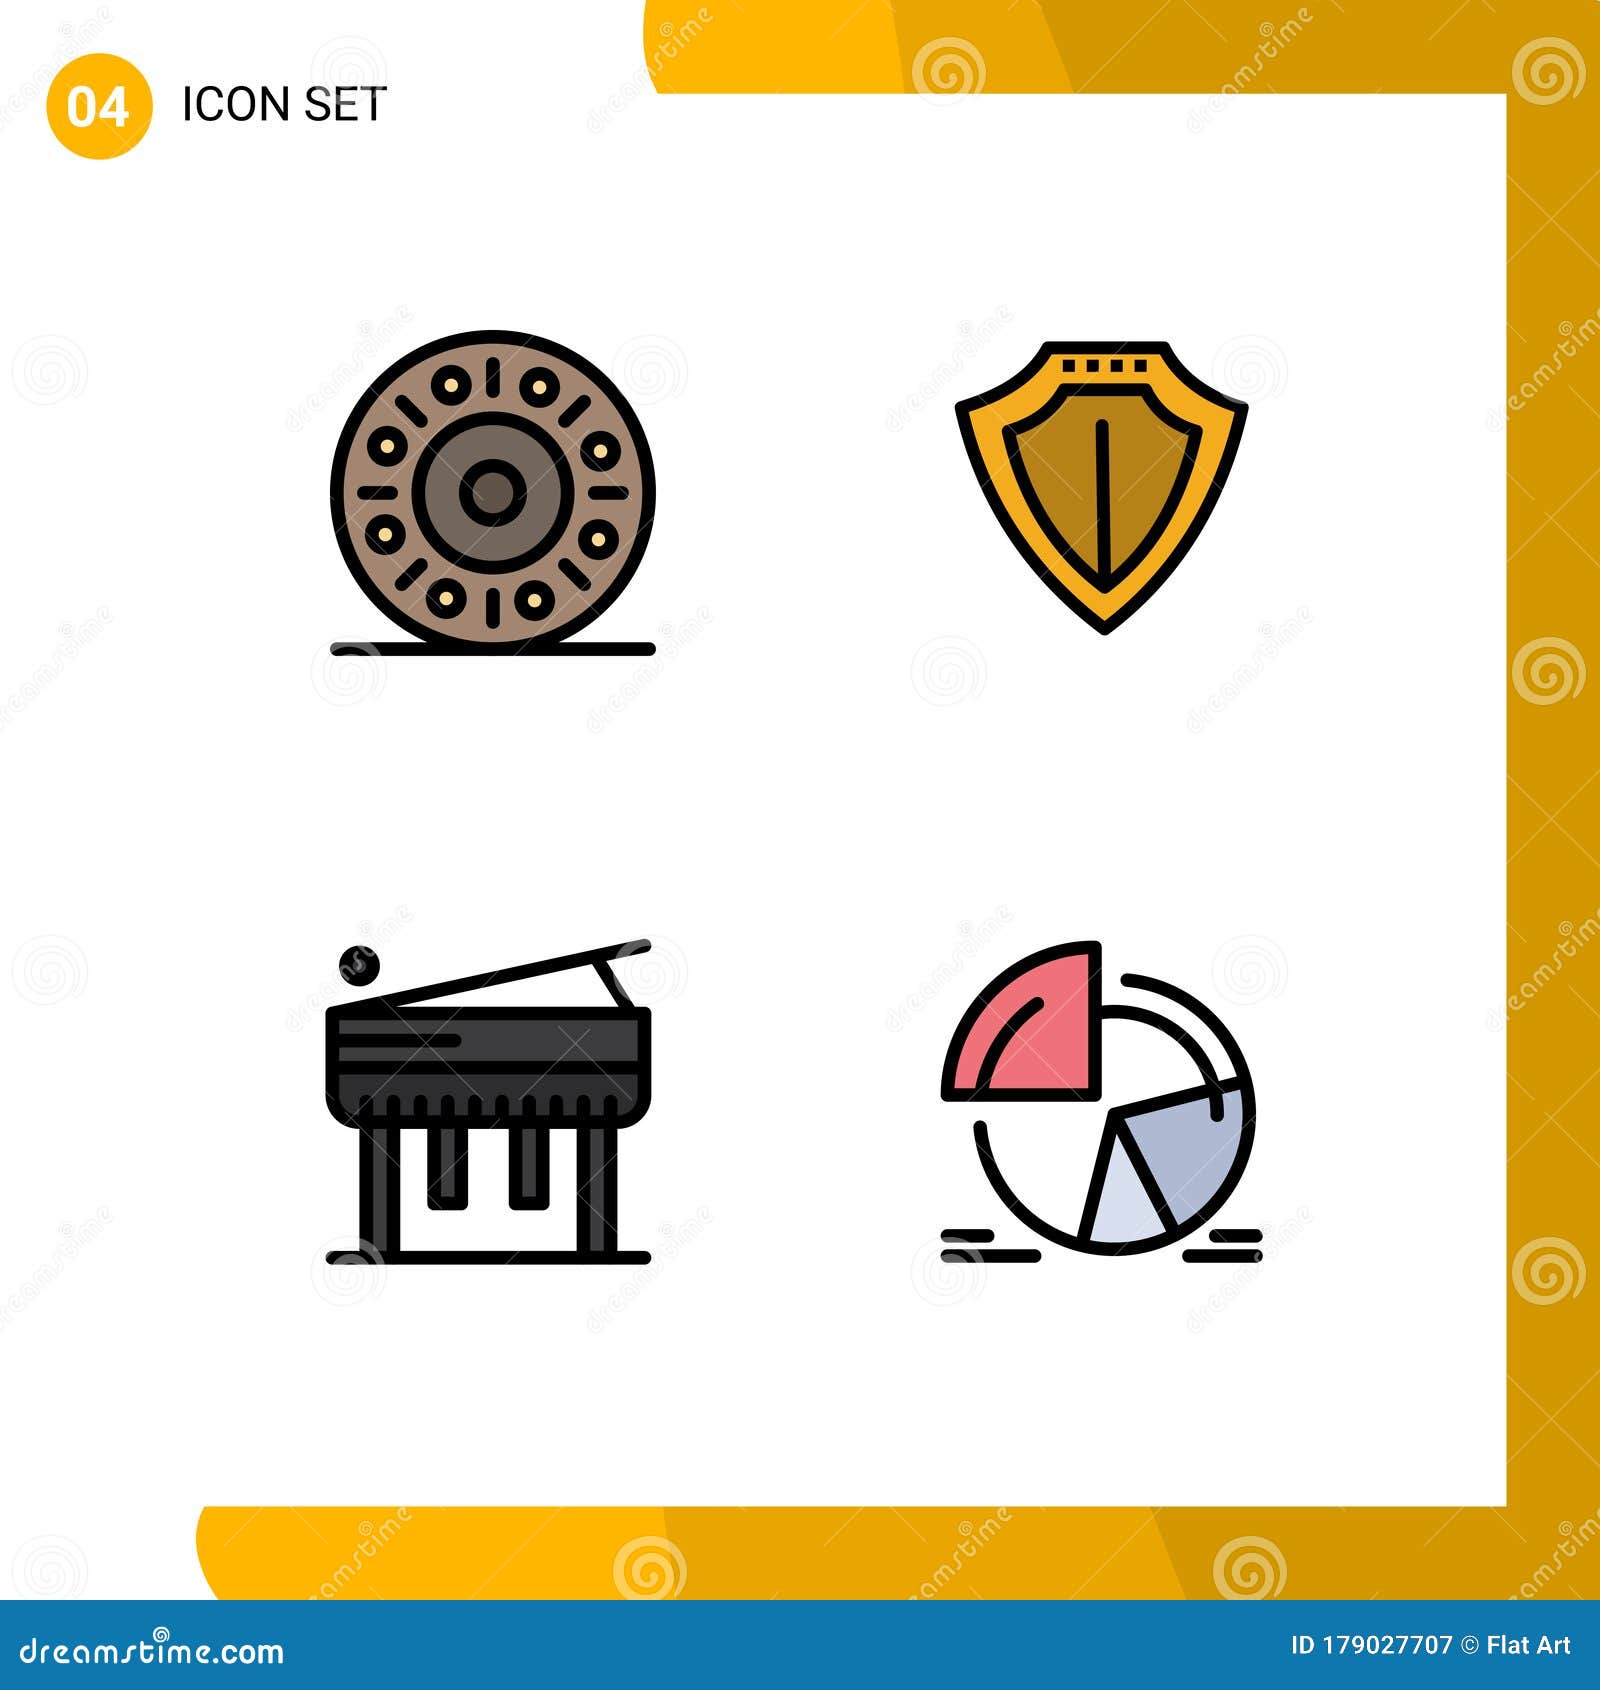 set of 4 modern ui icons s signs for donut, piano, sheild, protect, pie